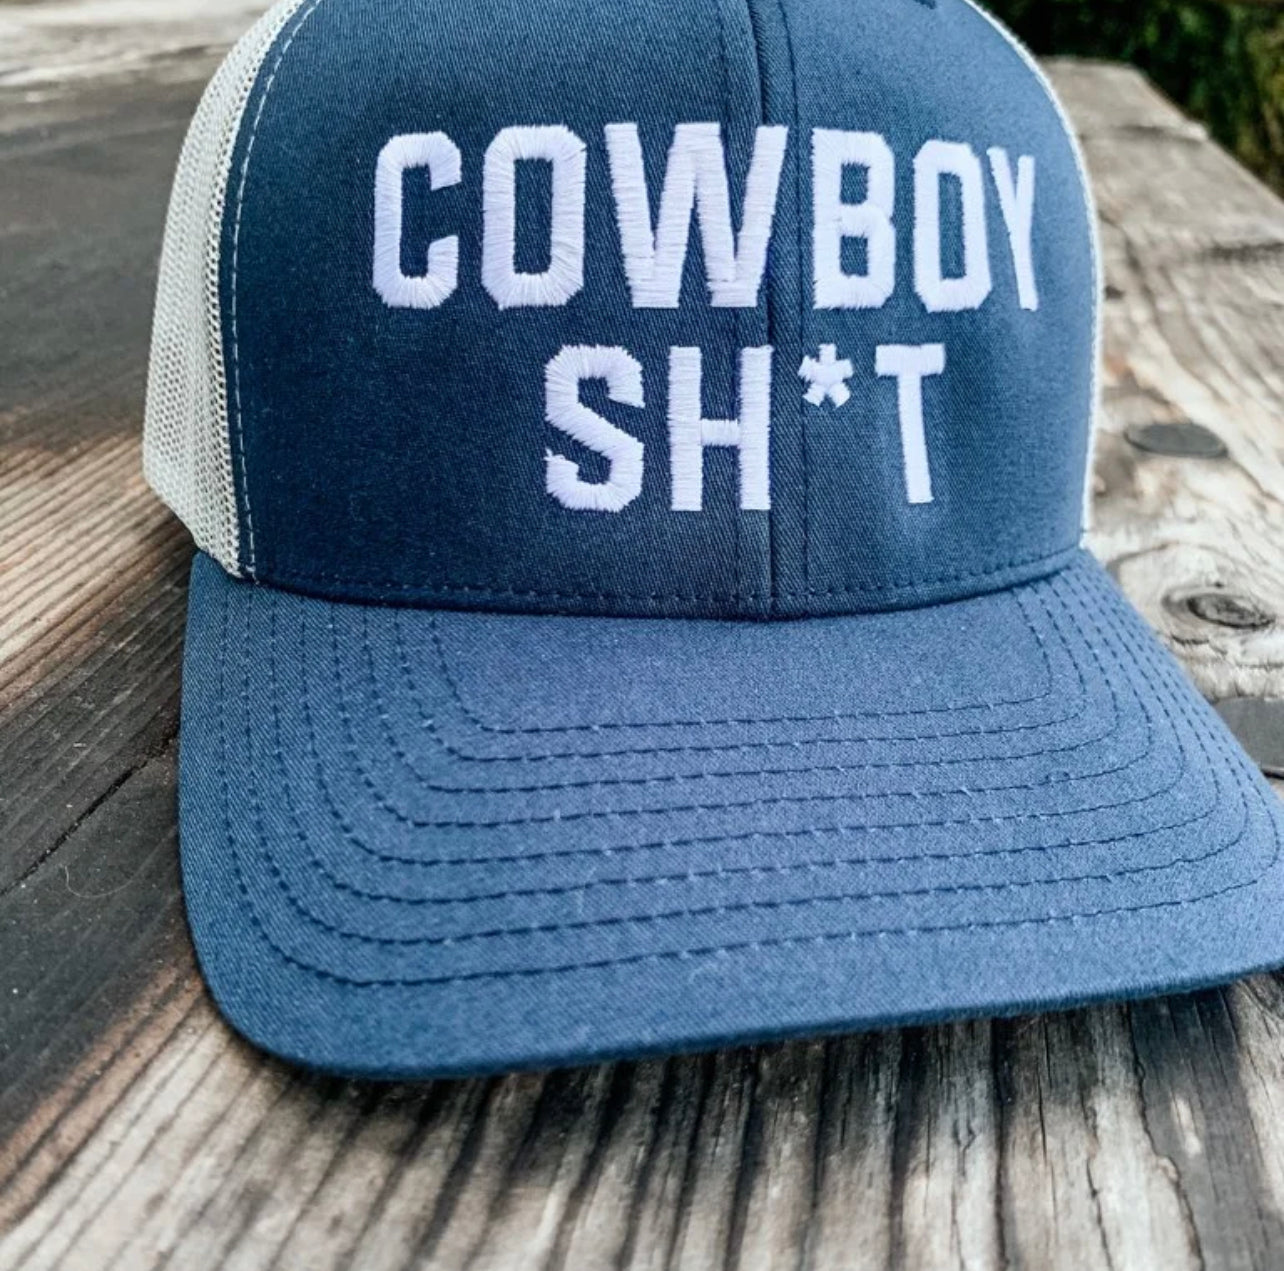 COWBOY SH*T embroidered hat